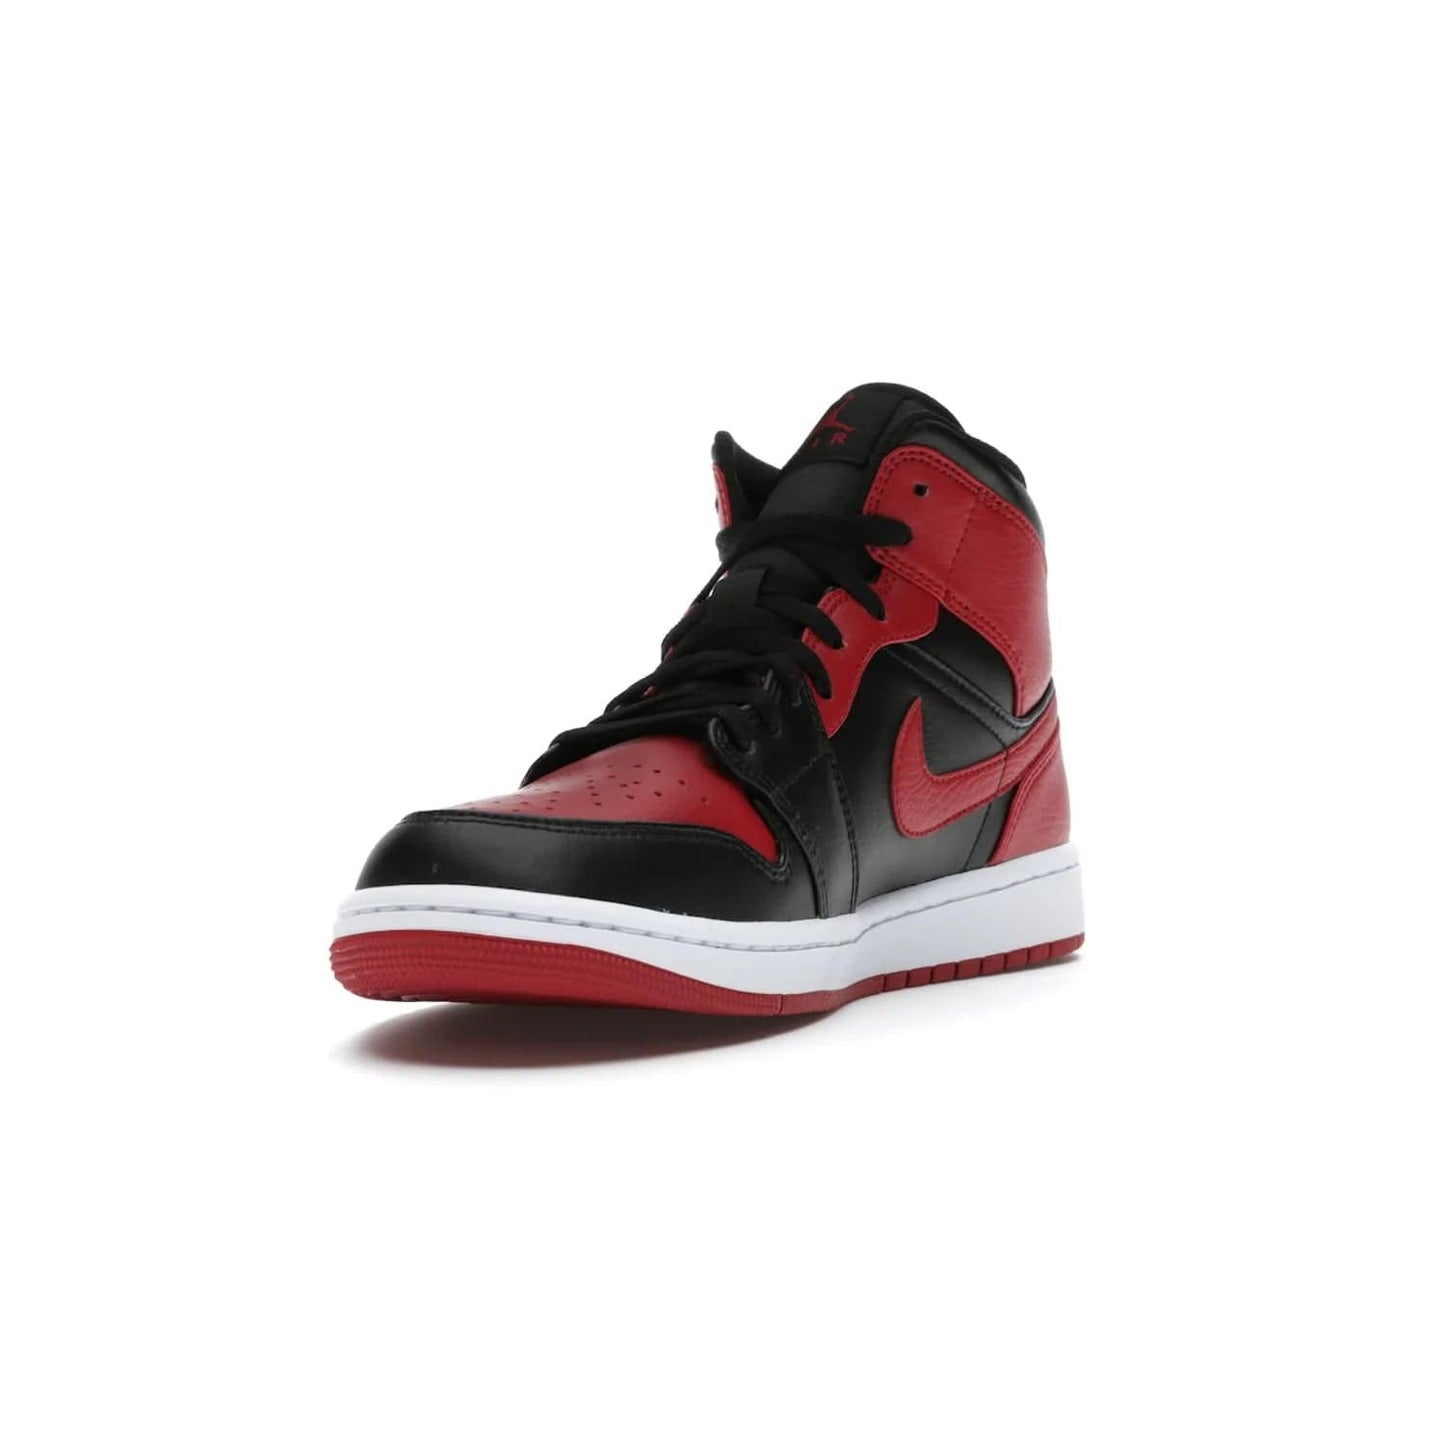 Jordan 1 Mid Banned (2020) - Image 13 - Only at www.BallersClubKickz.com - The Air Jordan 1 Mid Banned (2020) brings a modern twist to the classic Banned colorway. Features full-grain black and red leather uppers, red leather around the toe, collar, heel, & Swoosh. Release November 2021 for $110.